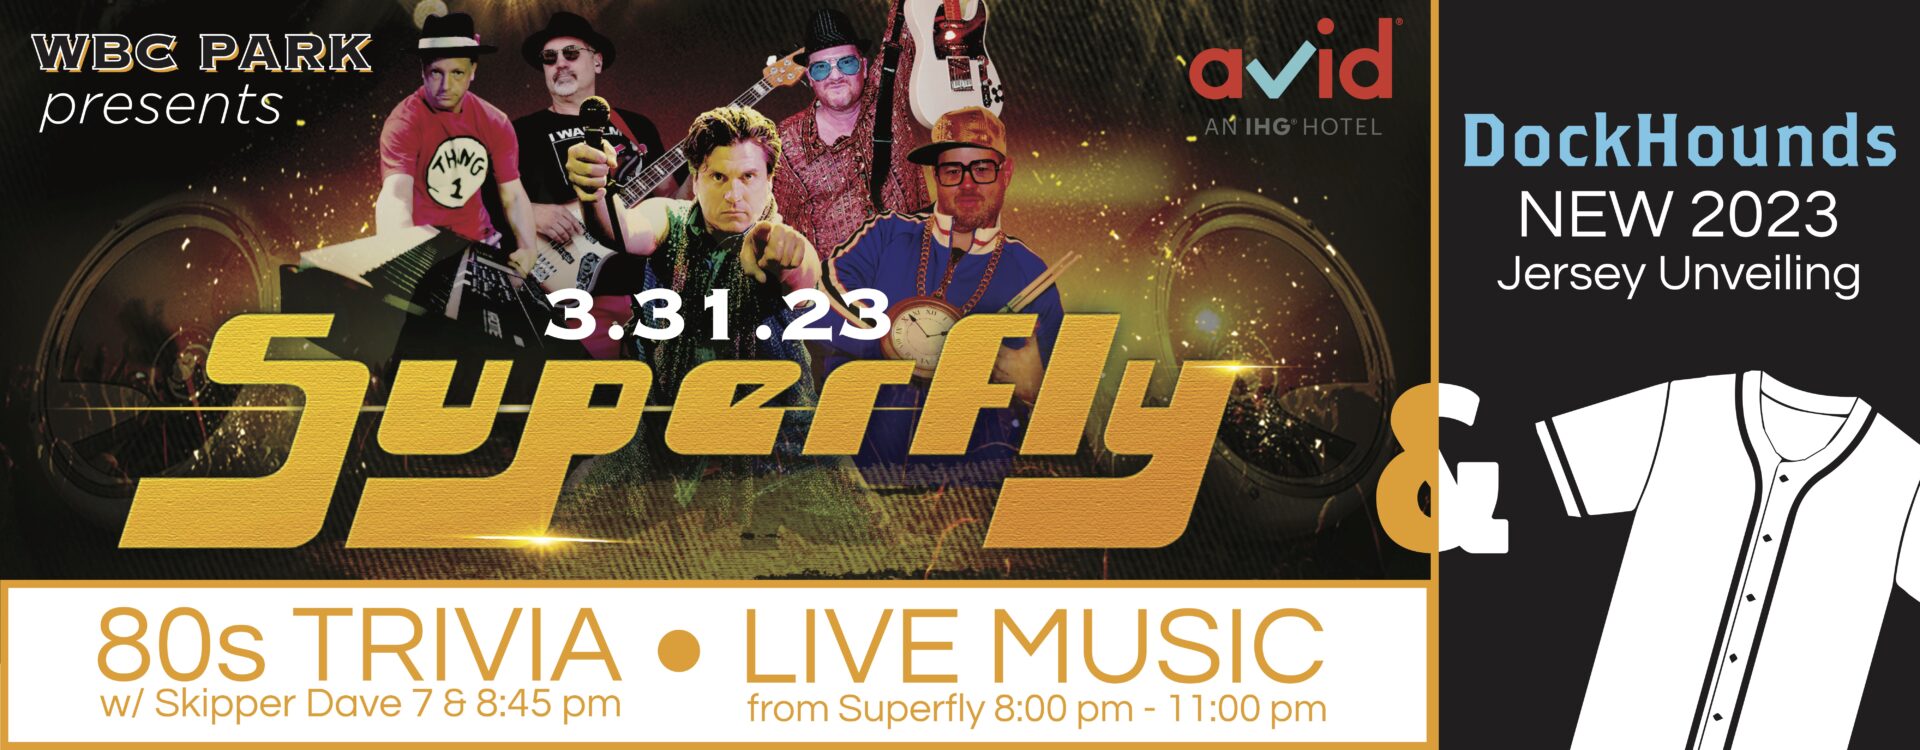 Superfly will perform at WBC Park on March 31, 2023